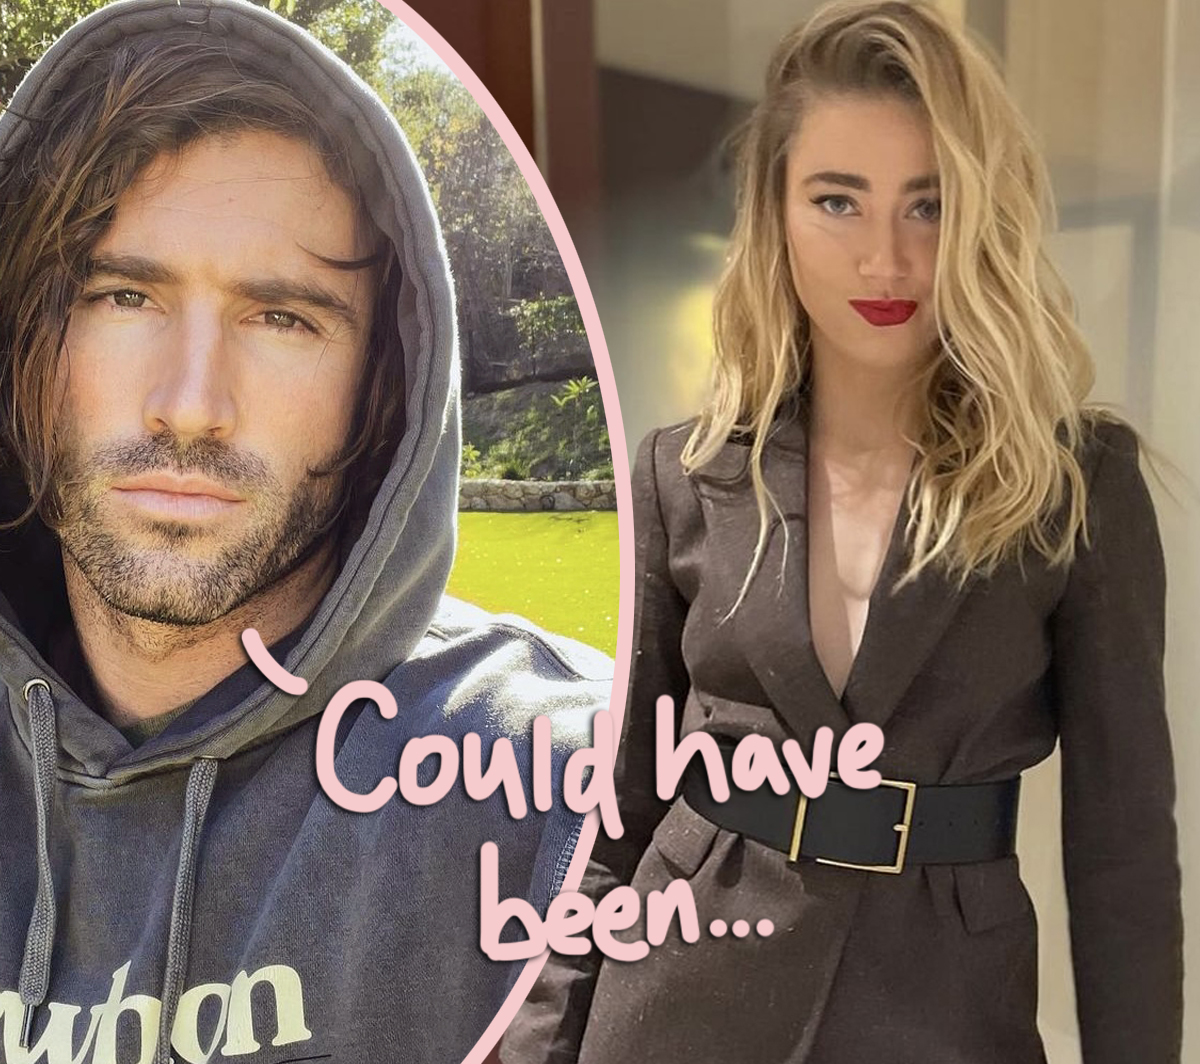 Amber Heard Once Rejected Brody Jenner Because She Wanted To Be 'A Movie Star,' Claims Spencer Pratt